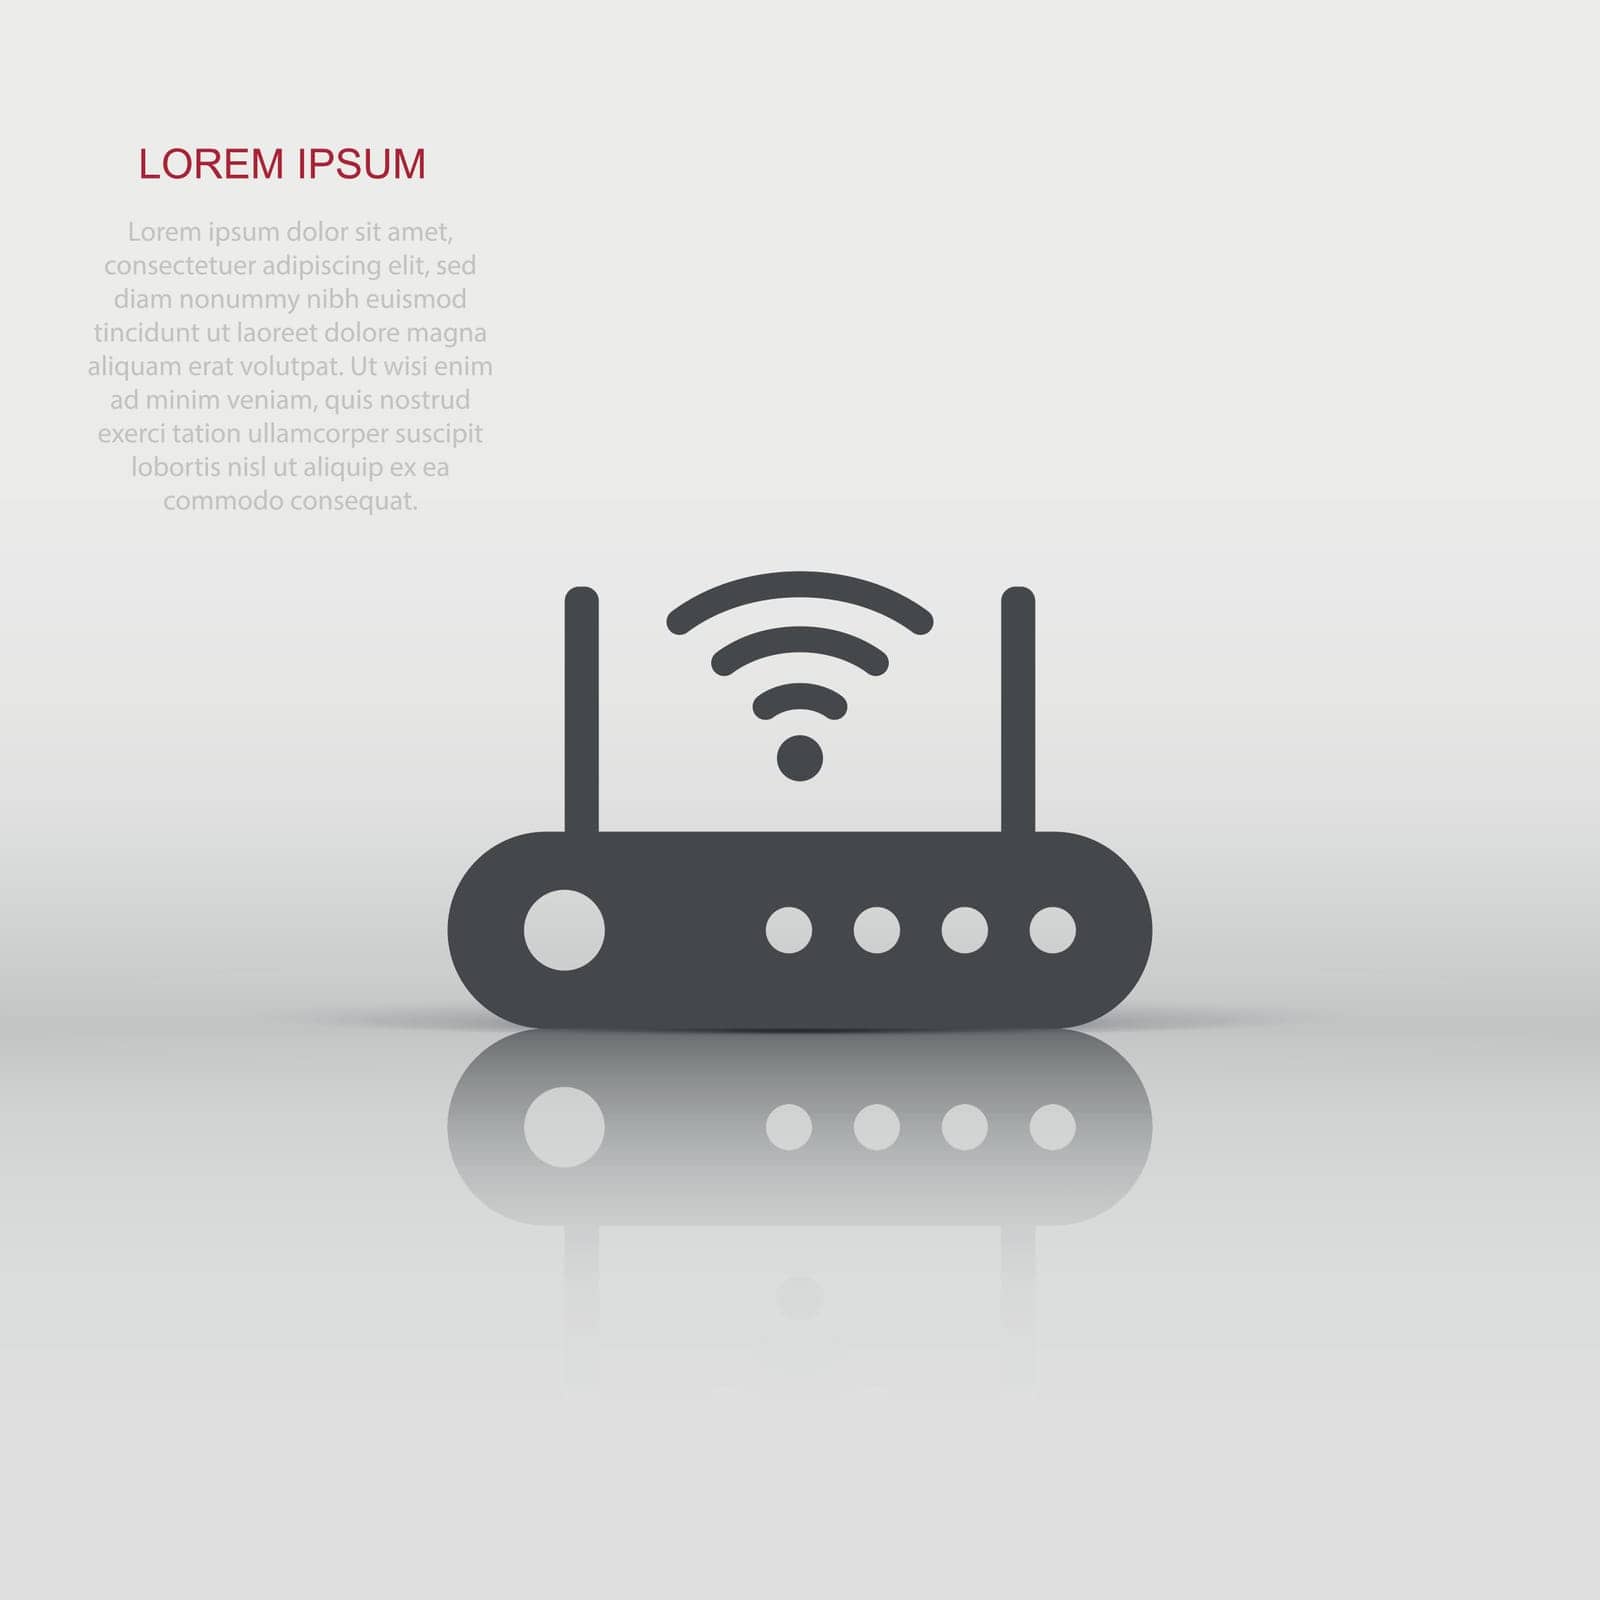 Wifi router icon in flat style. Broadband vector illustration on white isolated background. Internet connection business concept. by LysenkoA